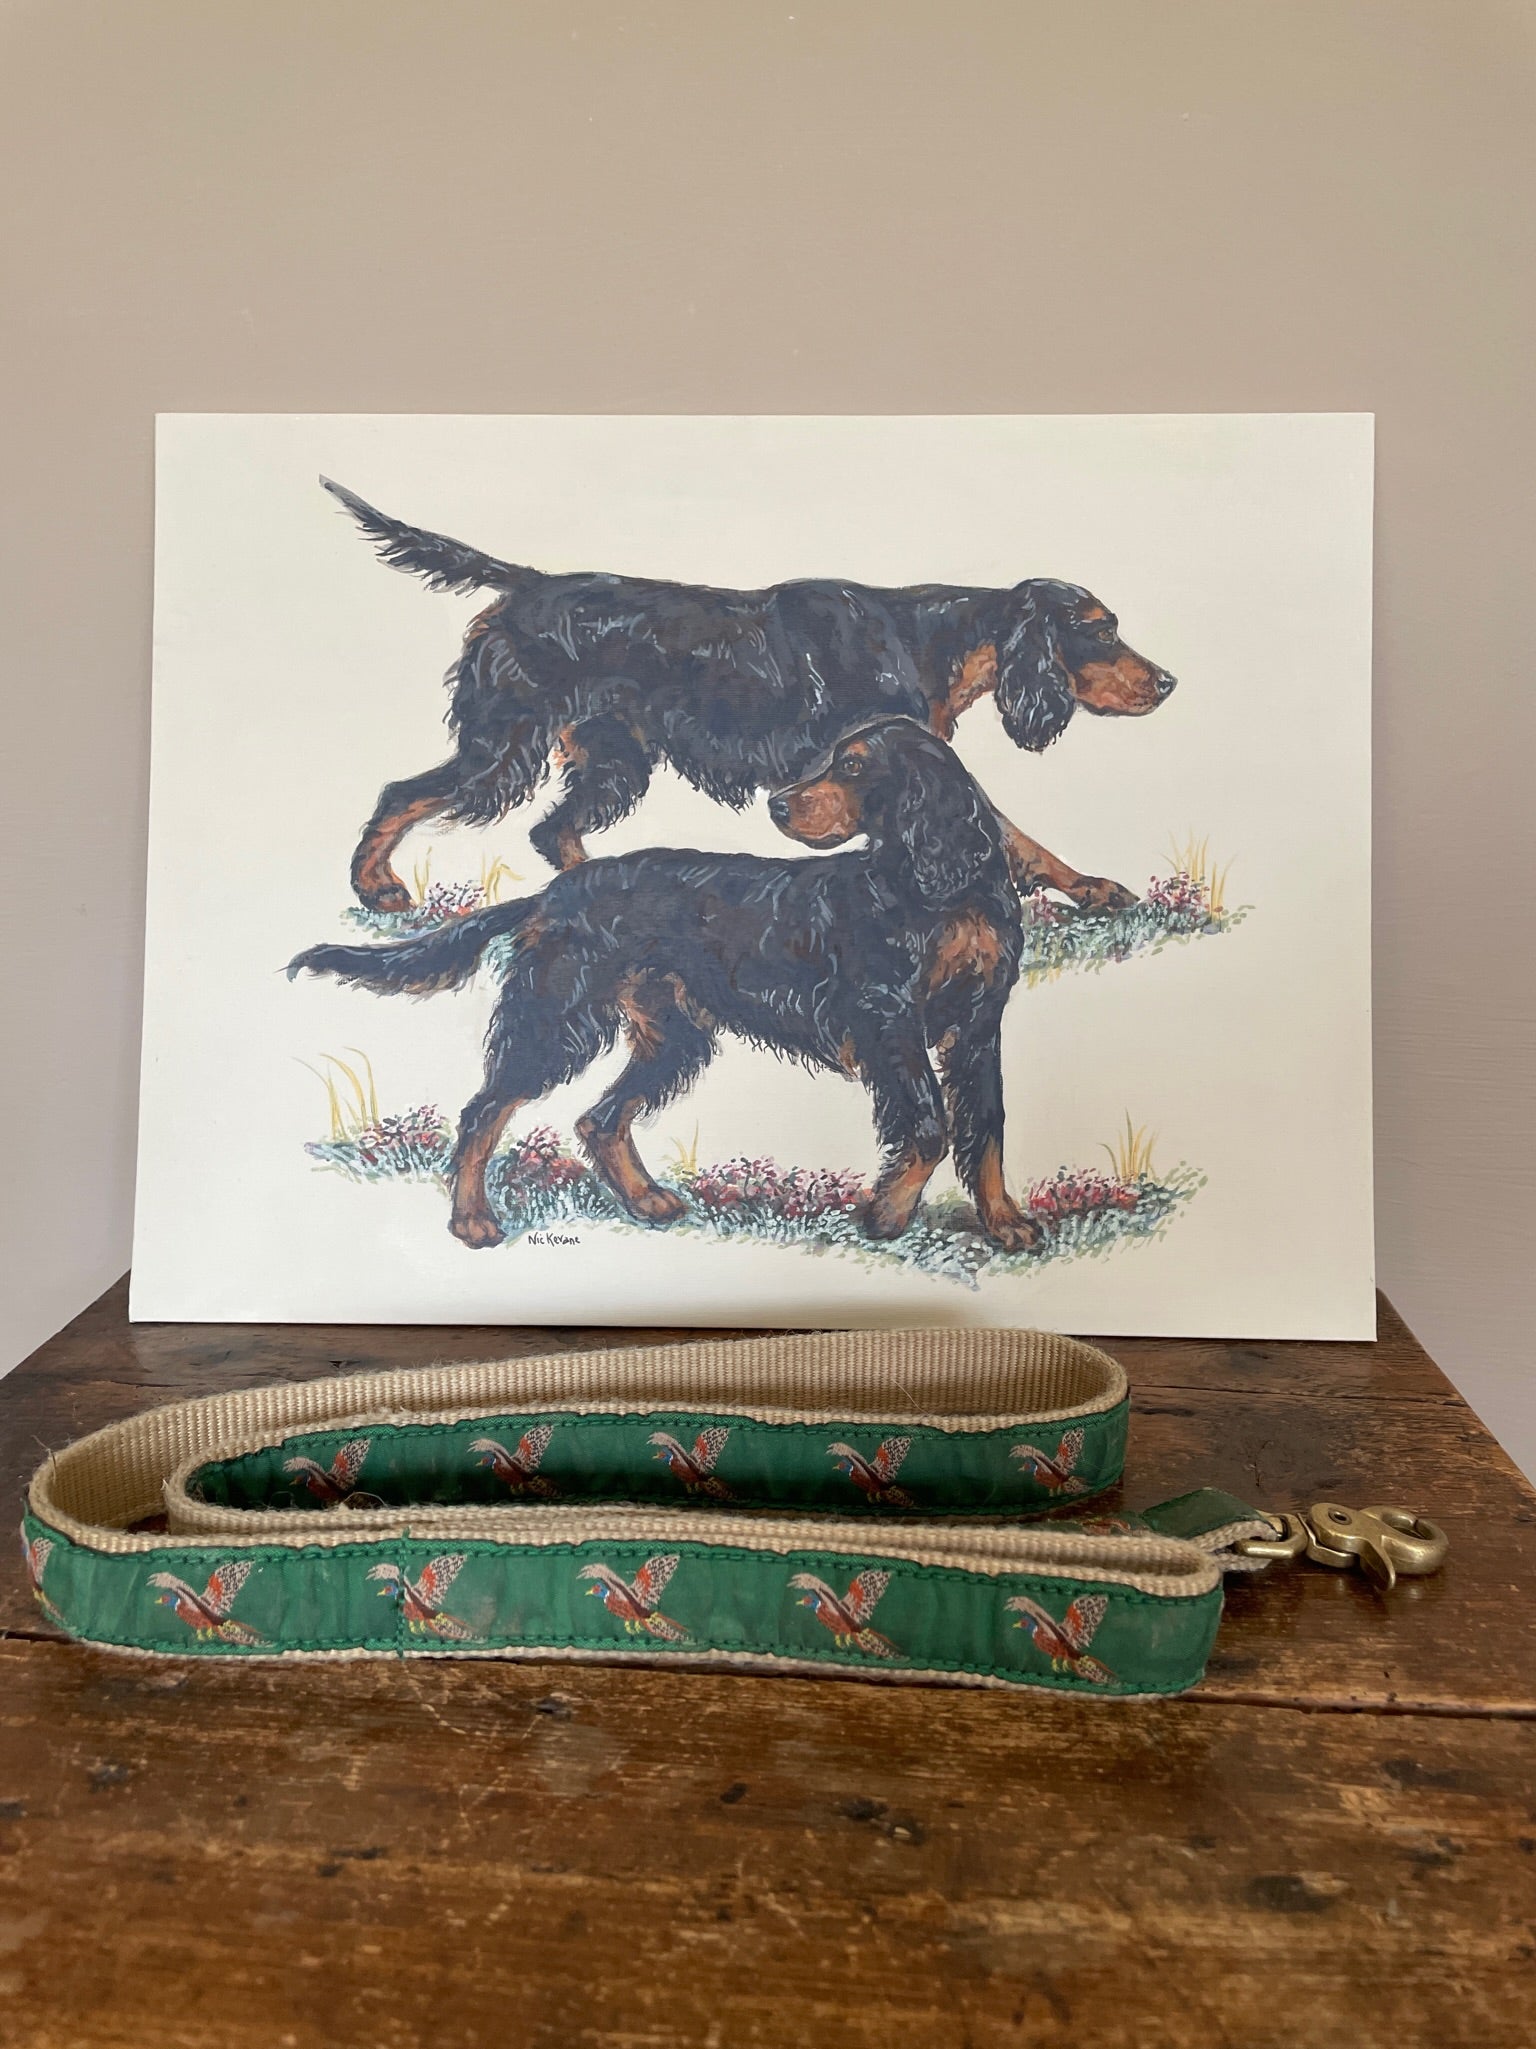 This painting shows two traditional gundogs hunting. I love to paint working dog breeds. Inspired by old country sporting prints.